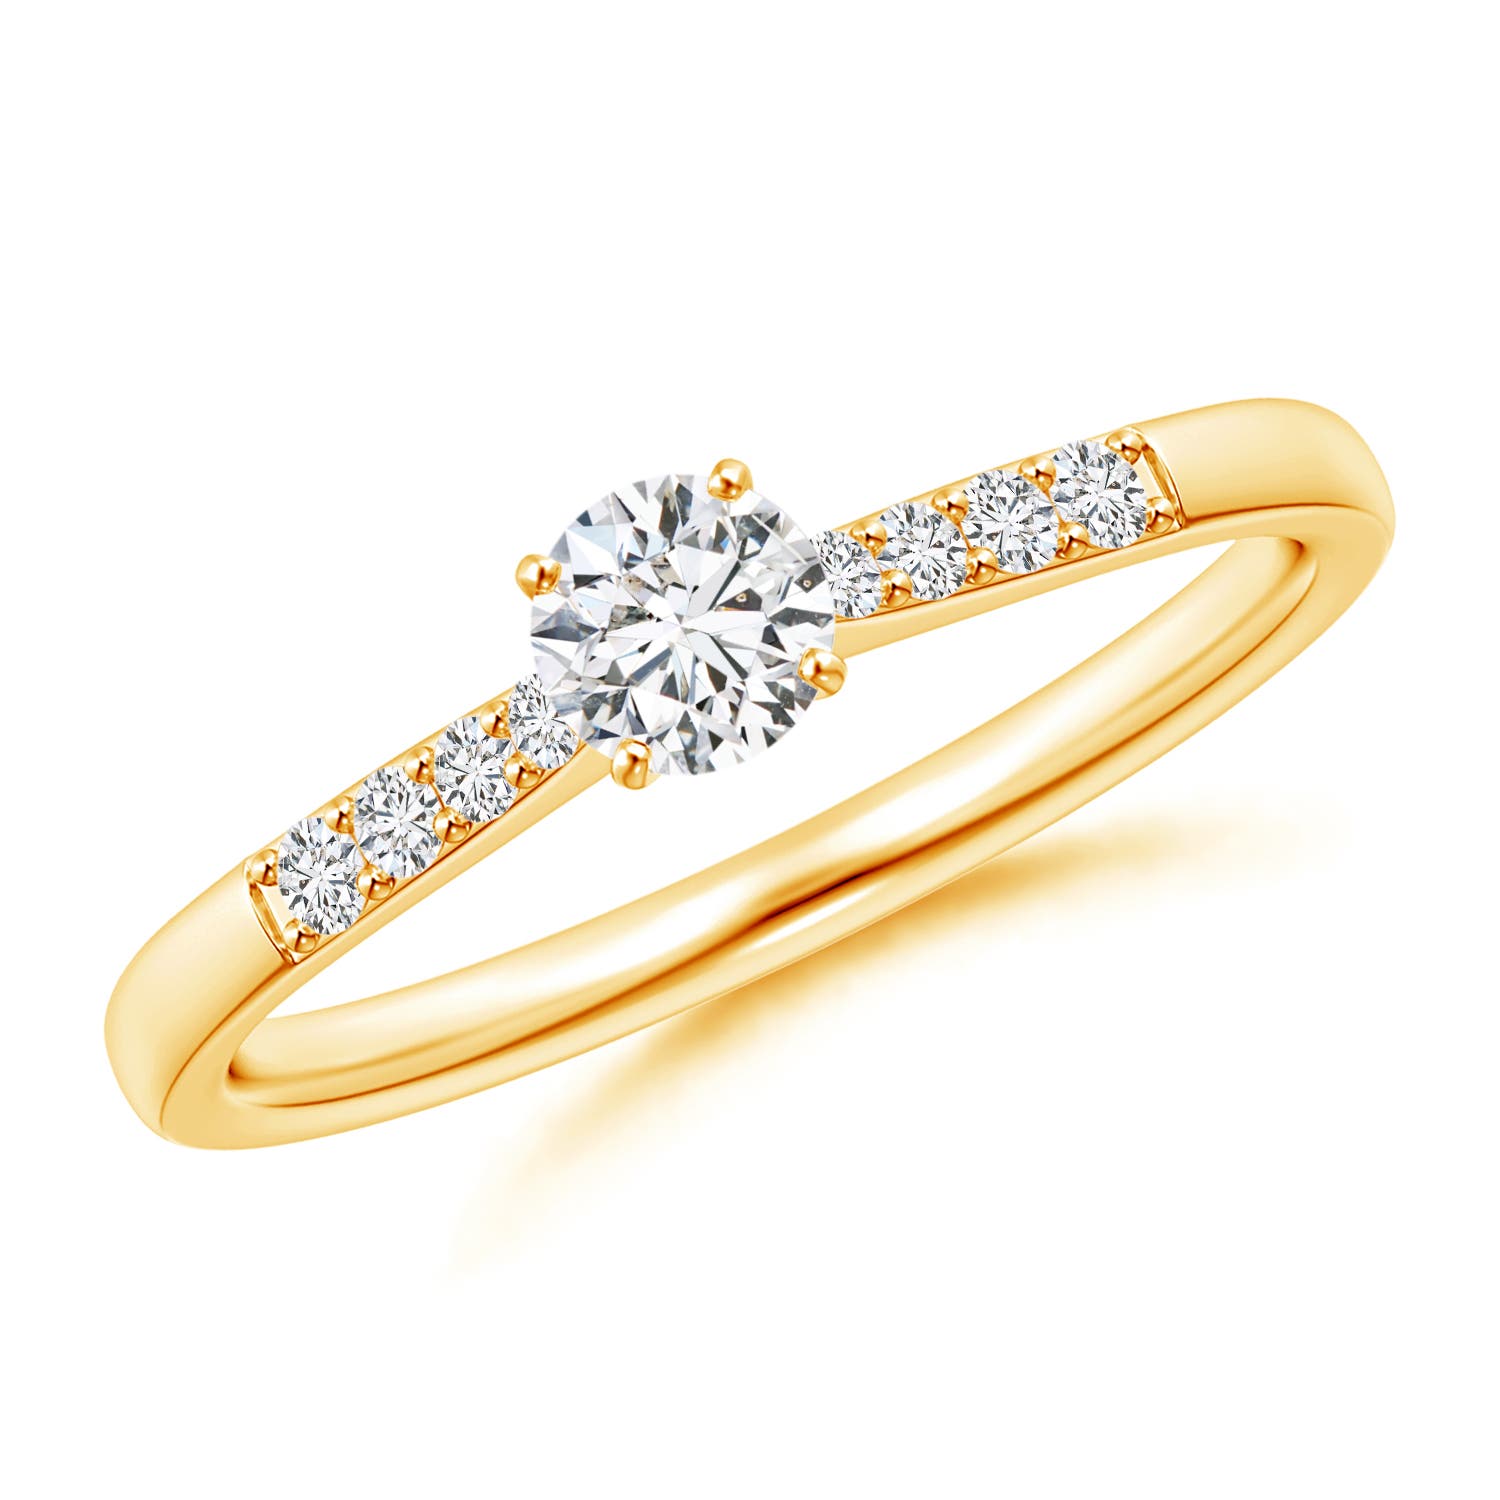 H, SI2 / 0.33 CT / 14 KT Yellow Gold